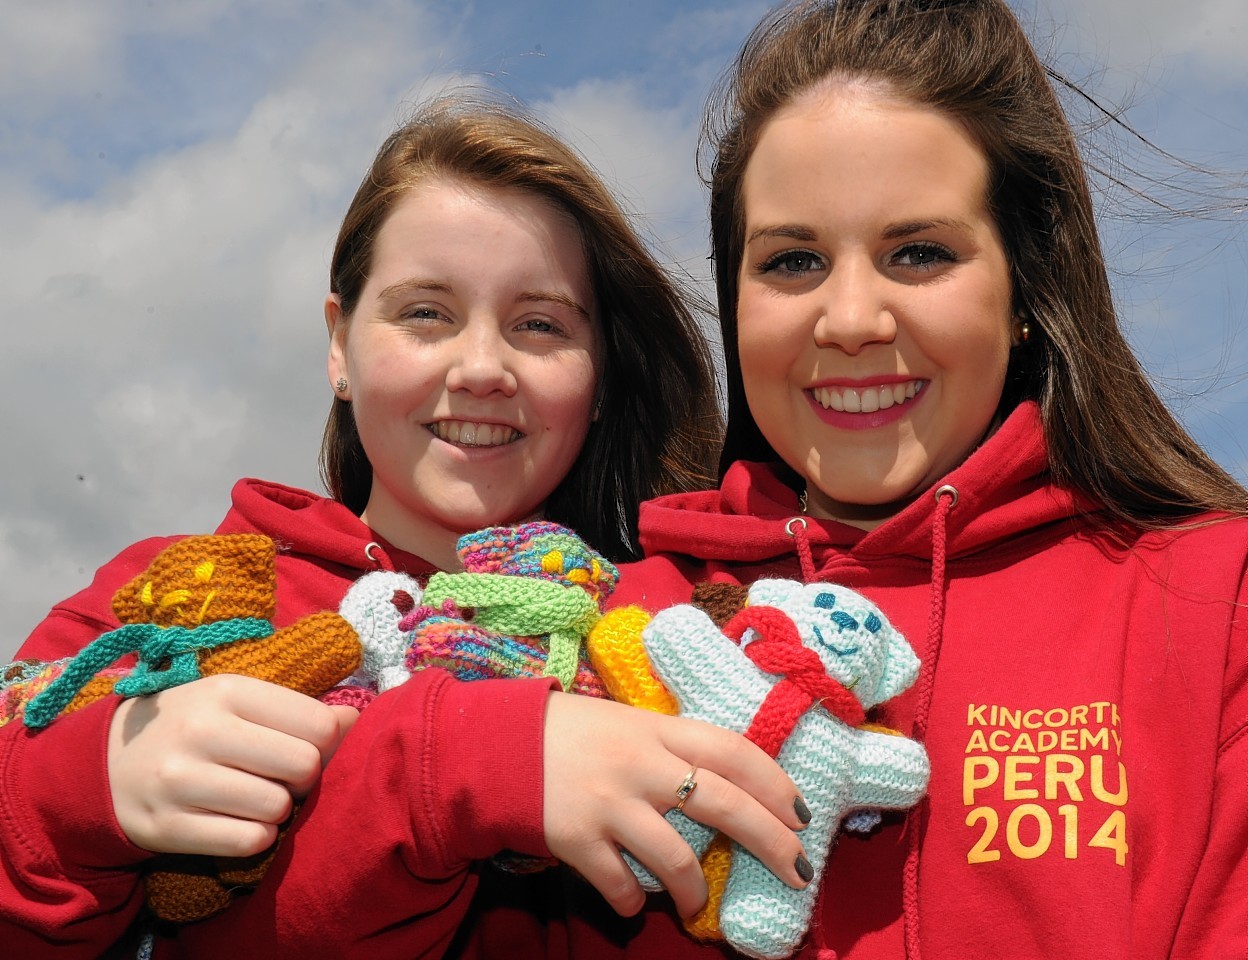 Kincorth Academy Aberdeen - pupils from the school are going to Peru to help orphans. One of the pupils grandmother has knitted over 60 teddies which they will take. (from left) Ailsa Ross, 17 (whose grandmother knitted over 60 teddies to take with them) and Aimee Gray, 16.